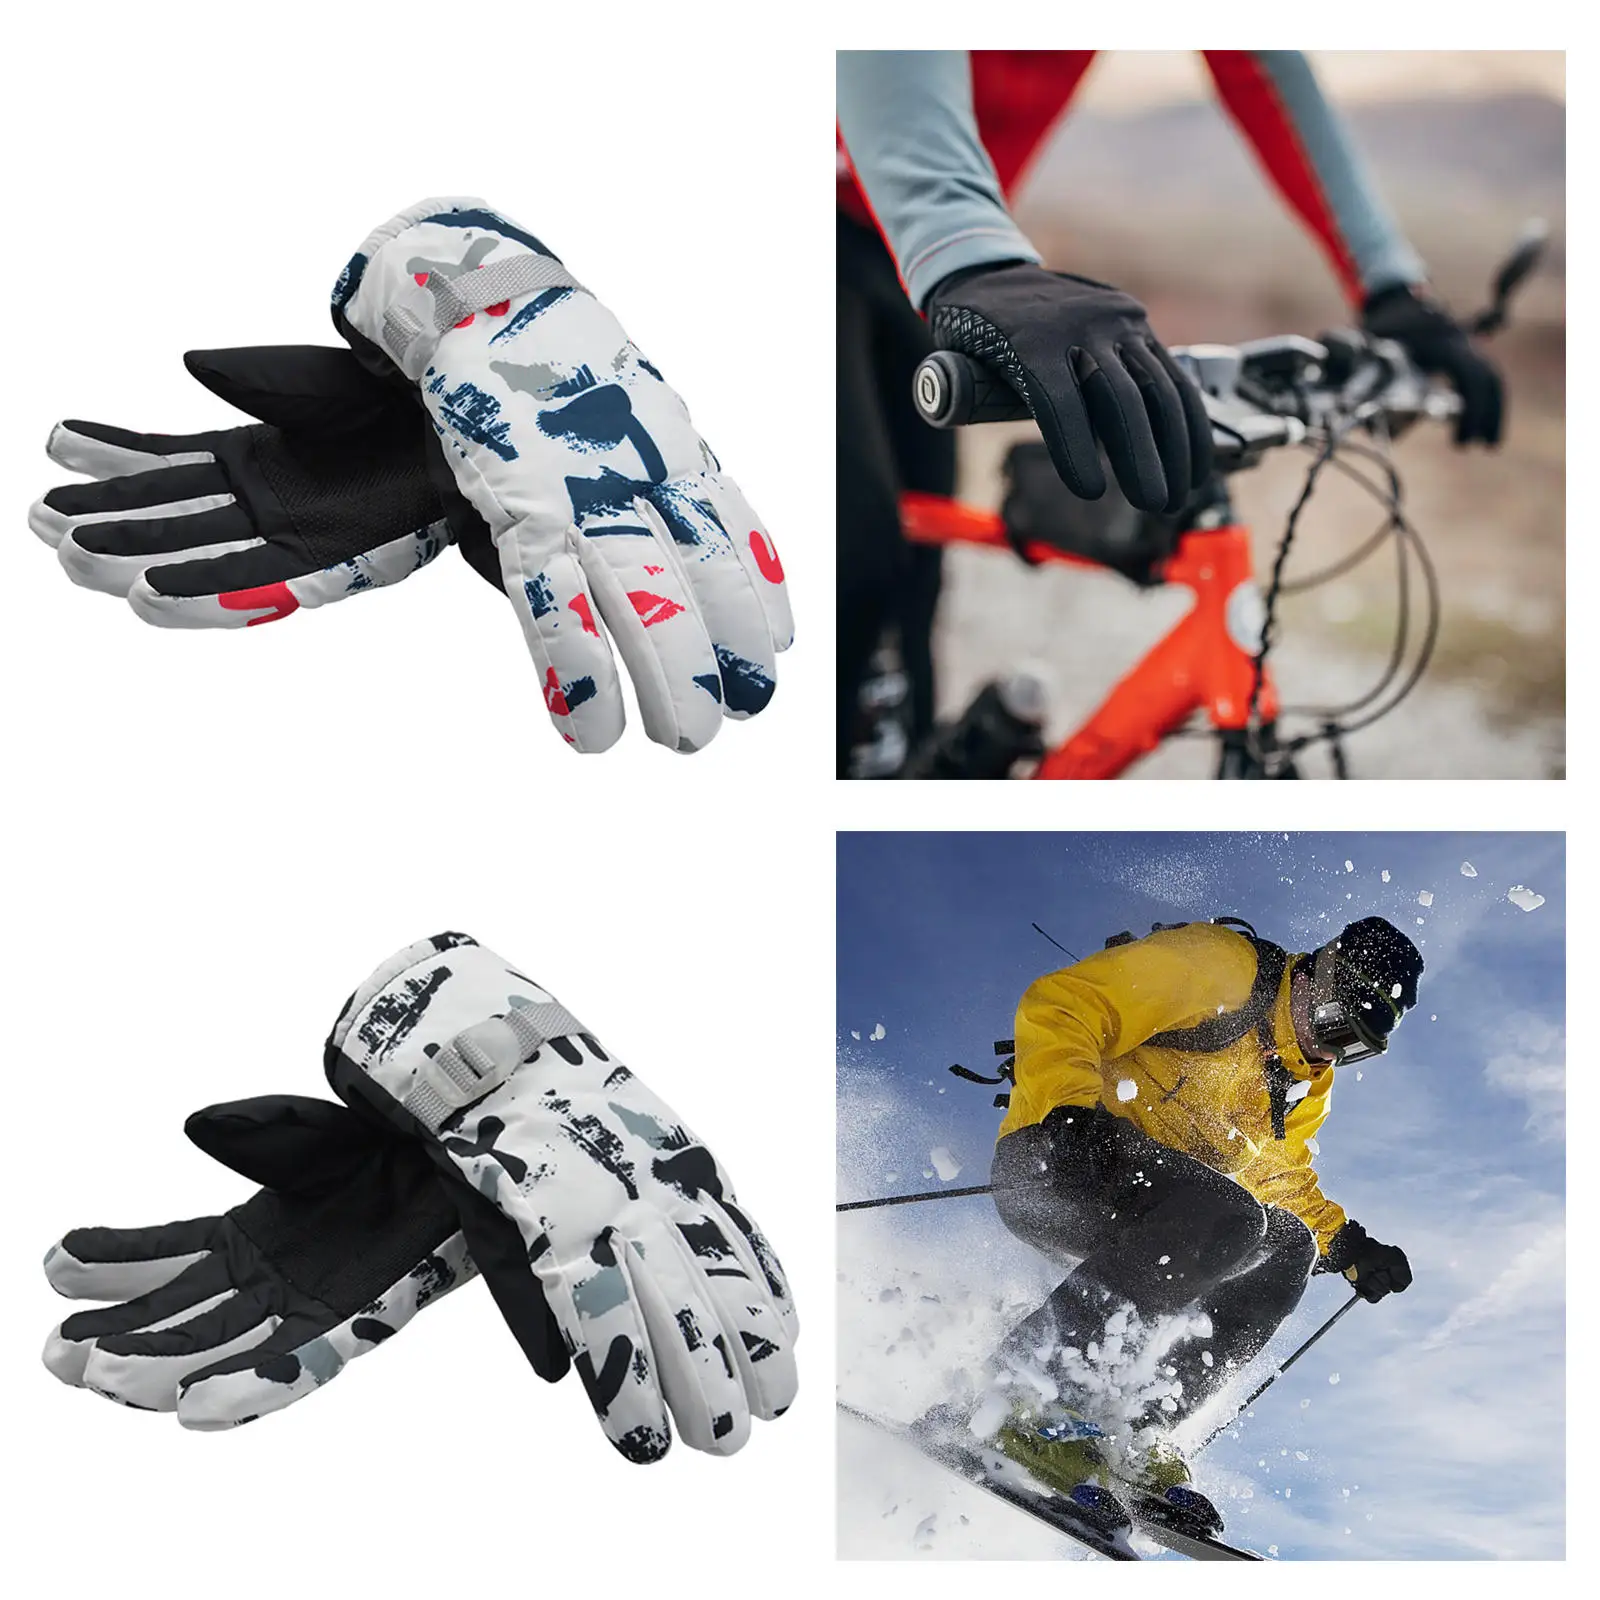 Winter Motercycle Gloves Thermal Gloves Liners Mitten for Bicycle Driving Hiking Riding